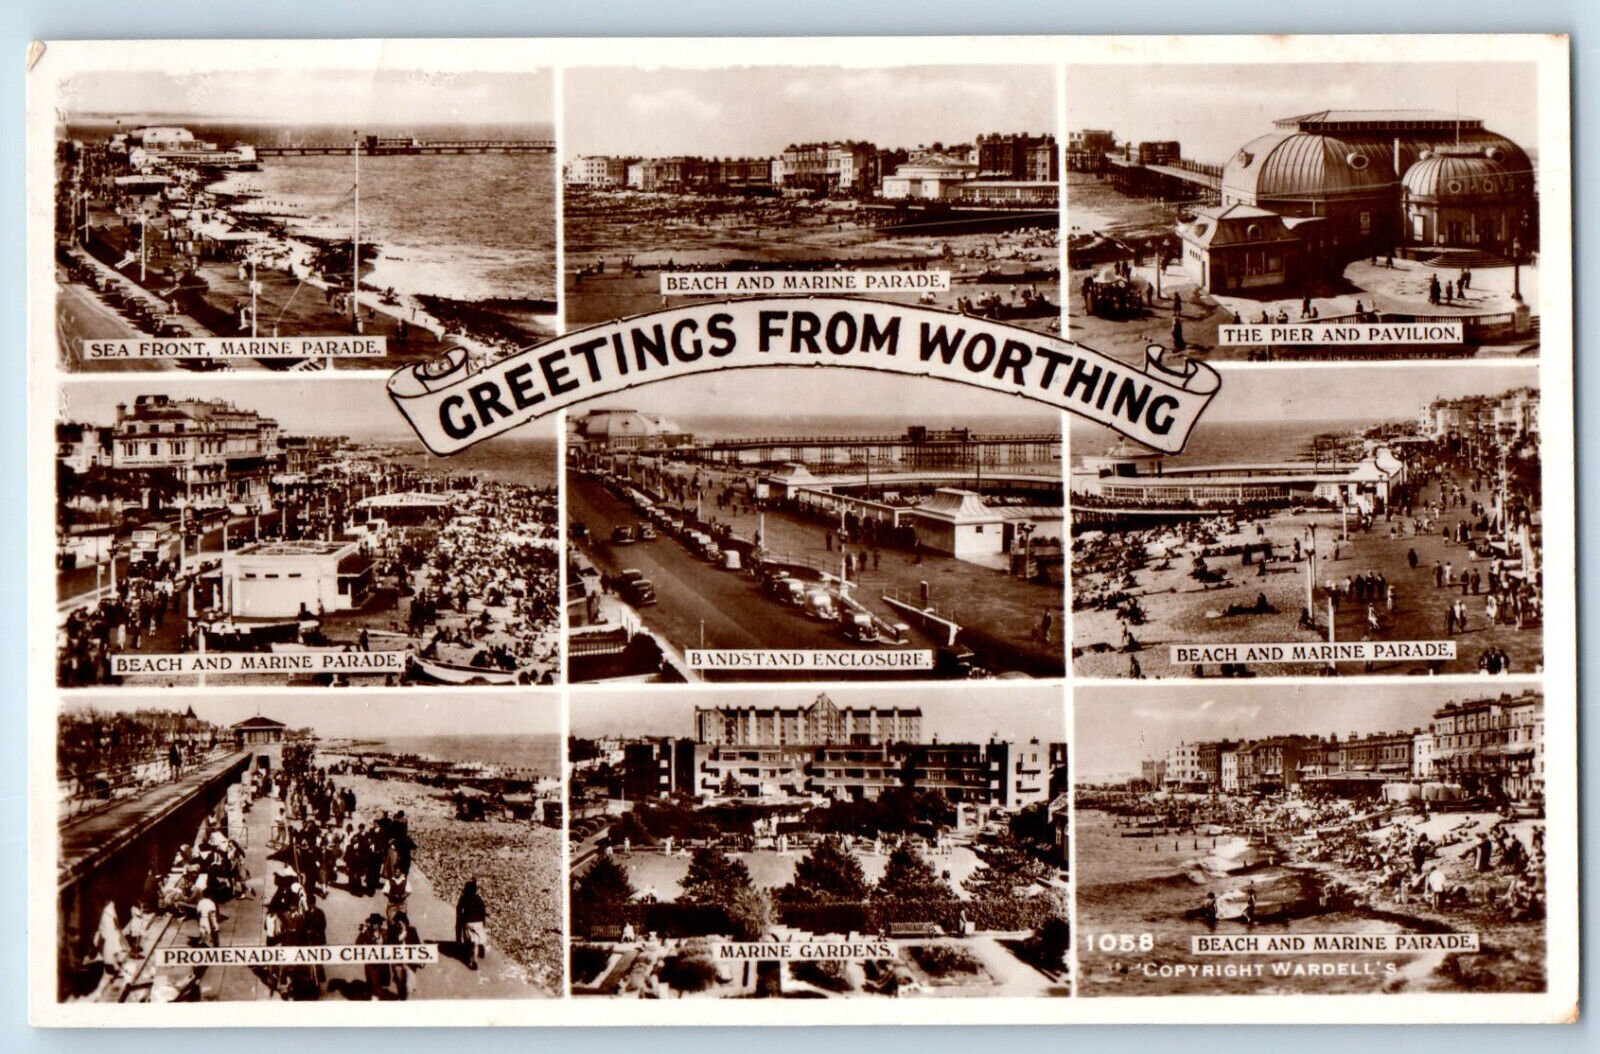 Sussex England Postcard Greetings from Worthing 1954 Multiview RPPC Photo